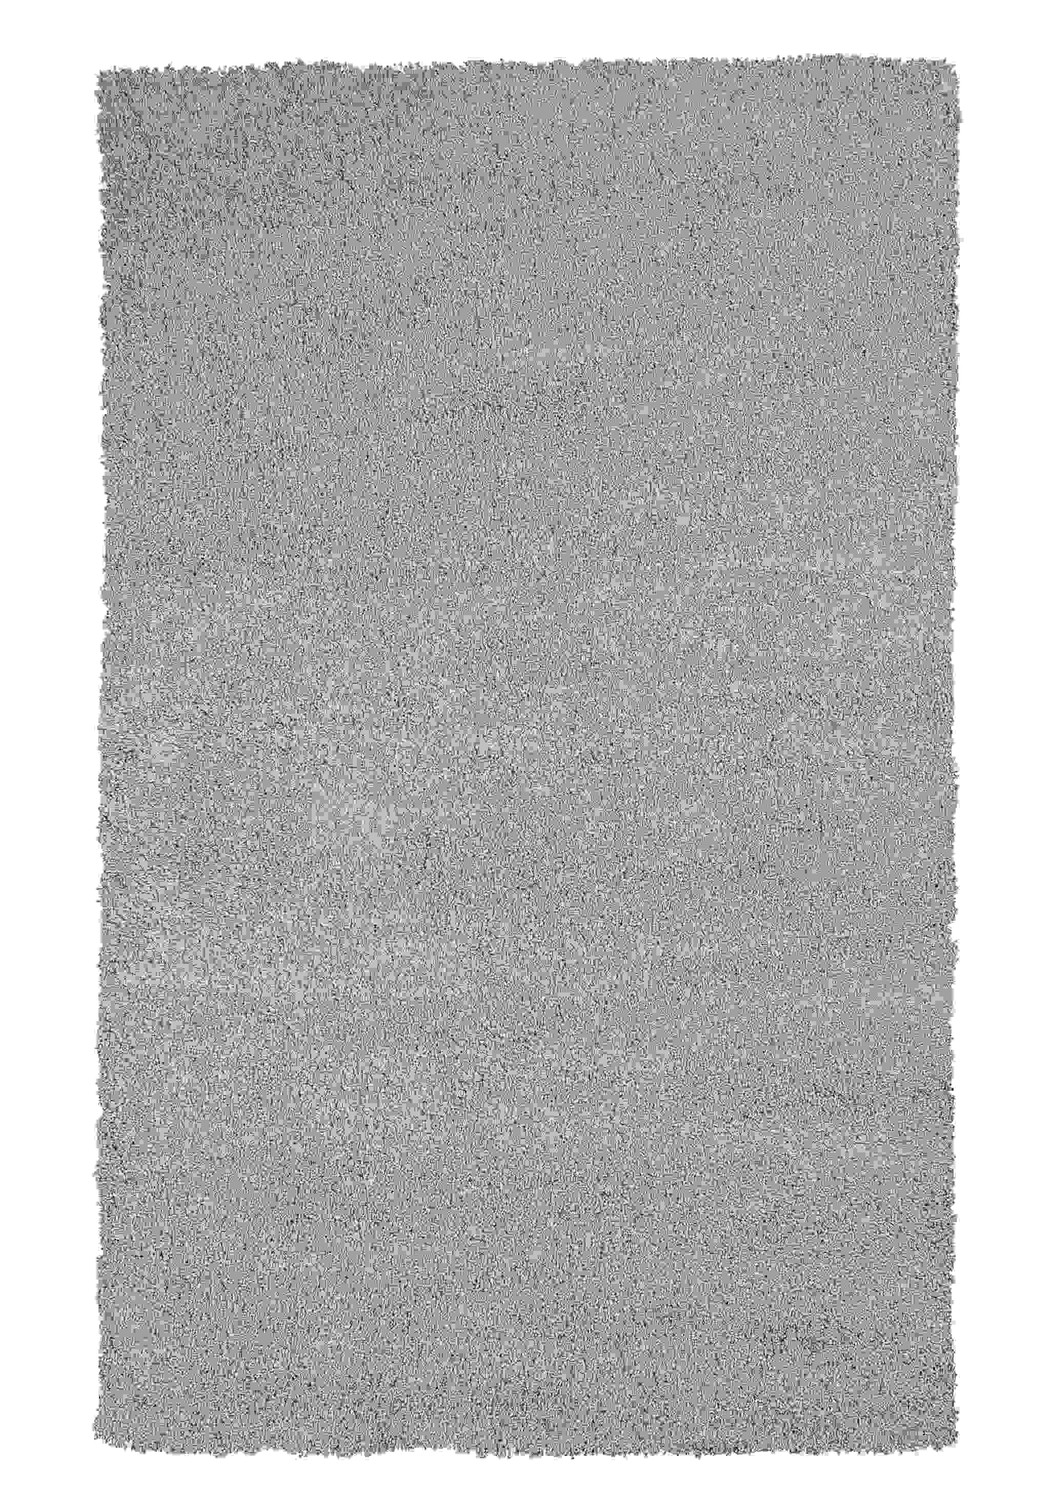 9' x 13' Polyester Blue Heather Area Rug